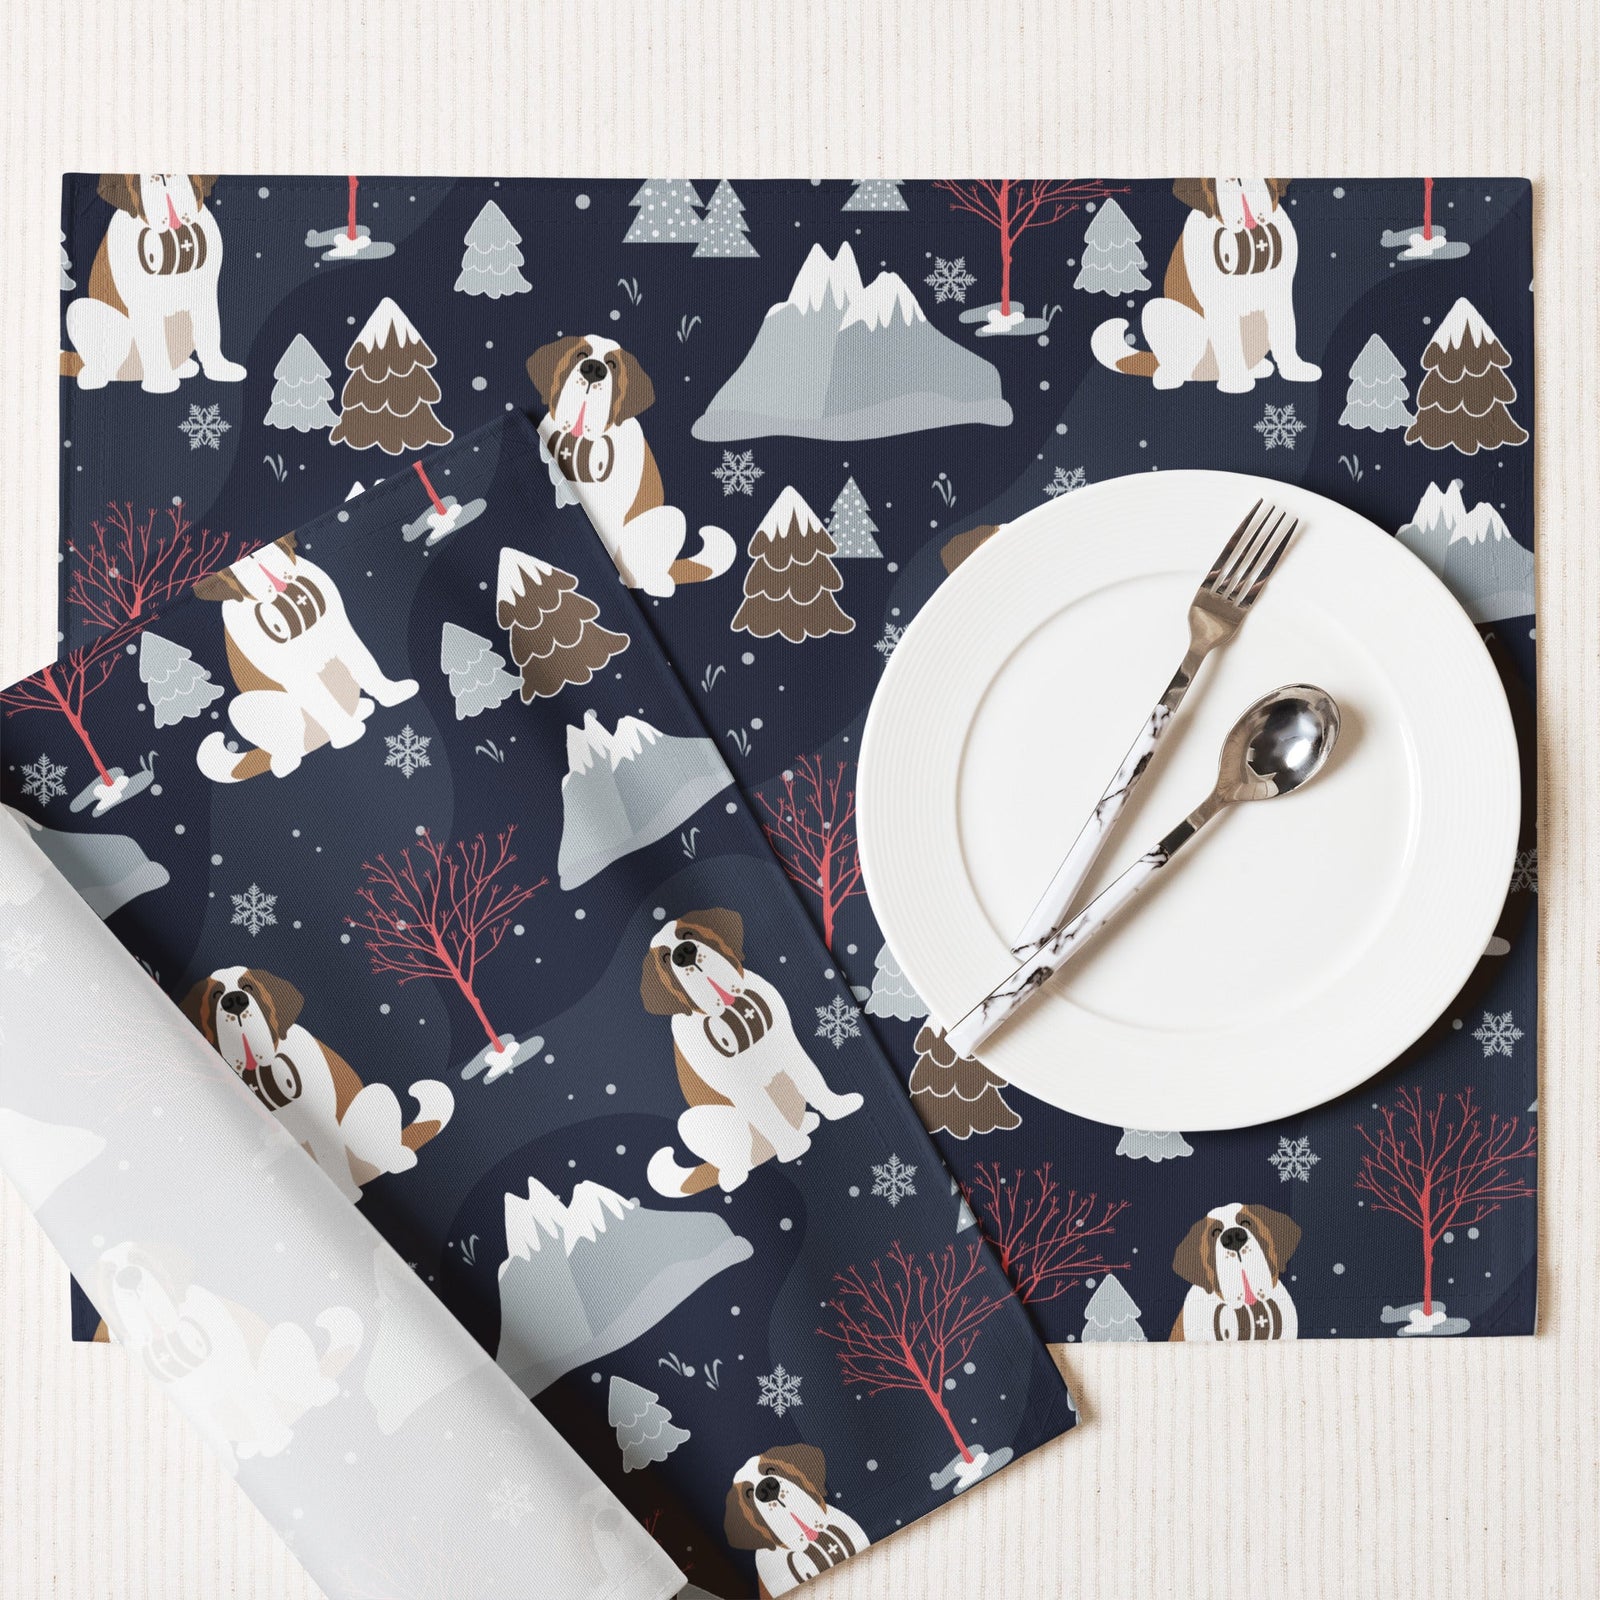 Reindeer Saint Bernard Dog Christmas Wrapping Paper Sheets by Lucy + Norman